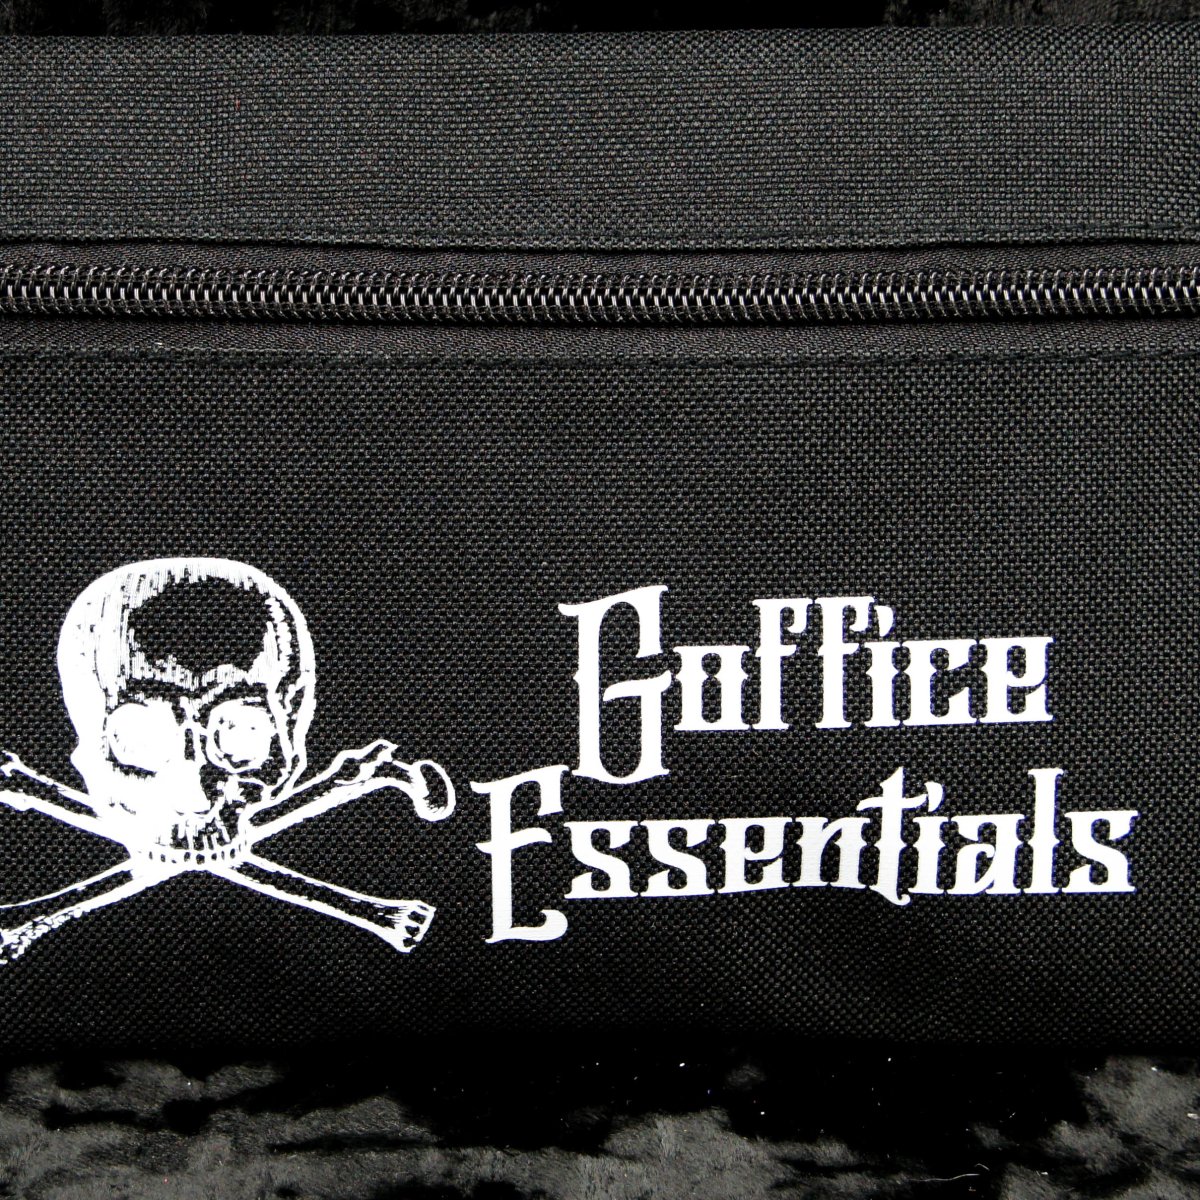 Gothic Skull Pencil Case | Goffice Essentials - The Gothic Stationery Company - Pencil Case